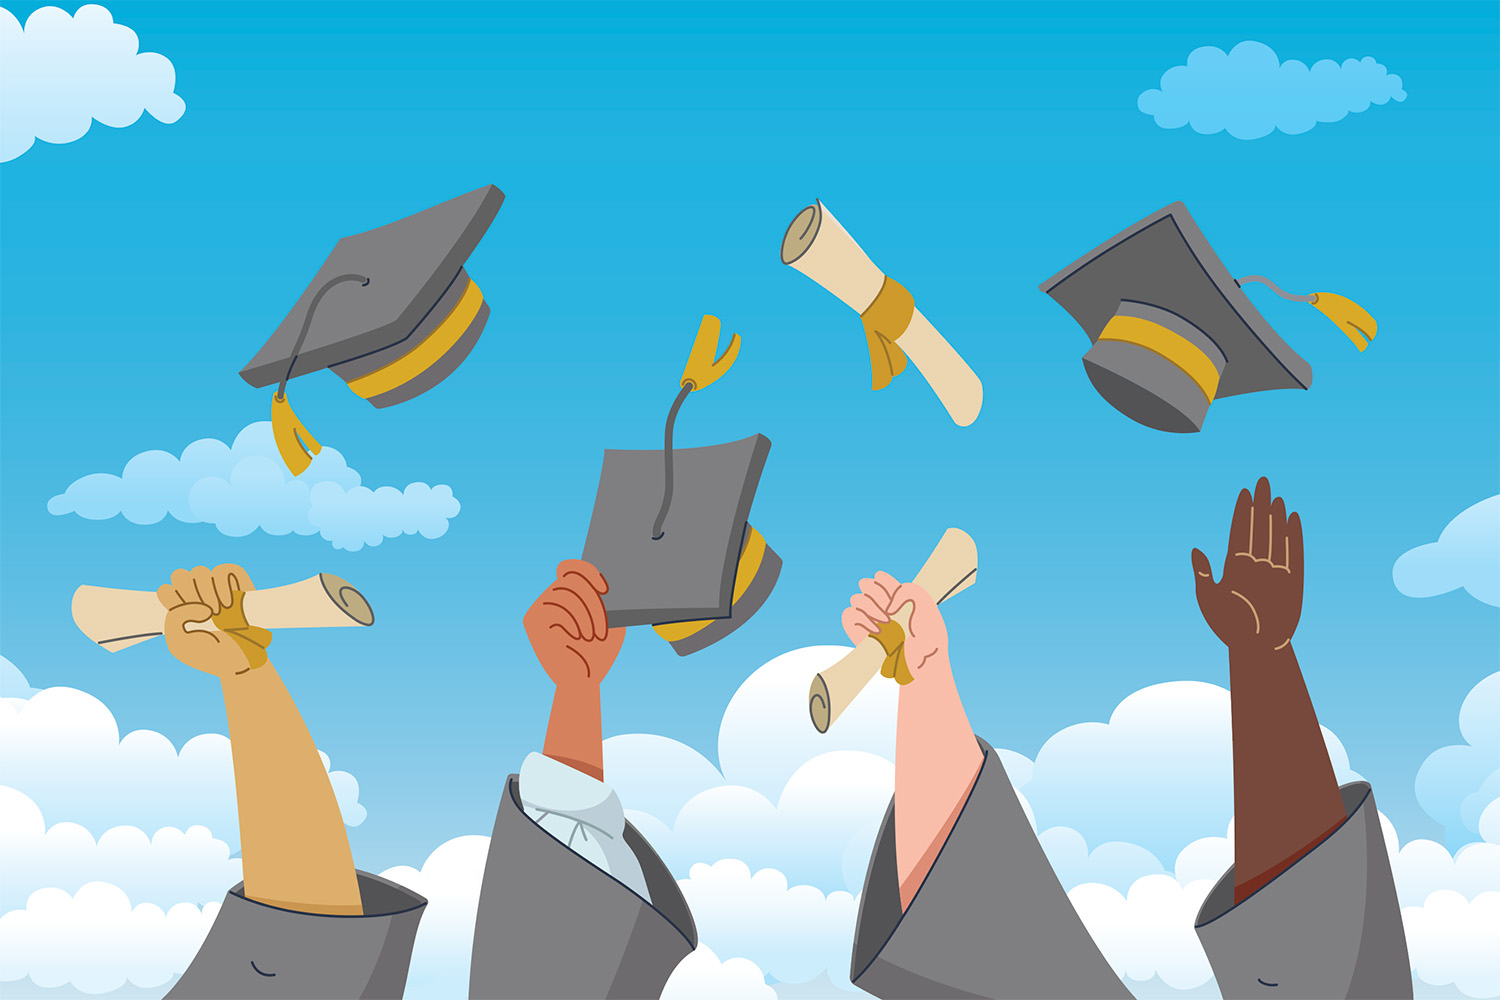 Against a background of blue sky with scattered clouds, four graduates raise their hands into the air. Two hold diplomas, and one holds a graduation cap. The hands represent a mix of skin tones.